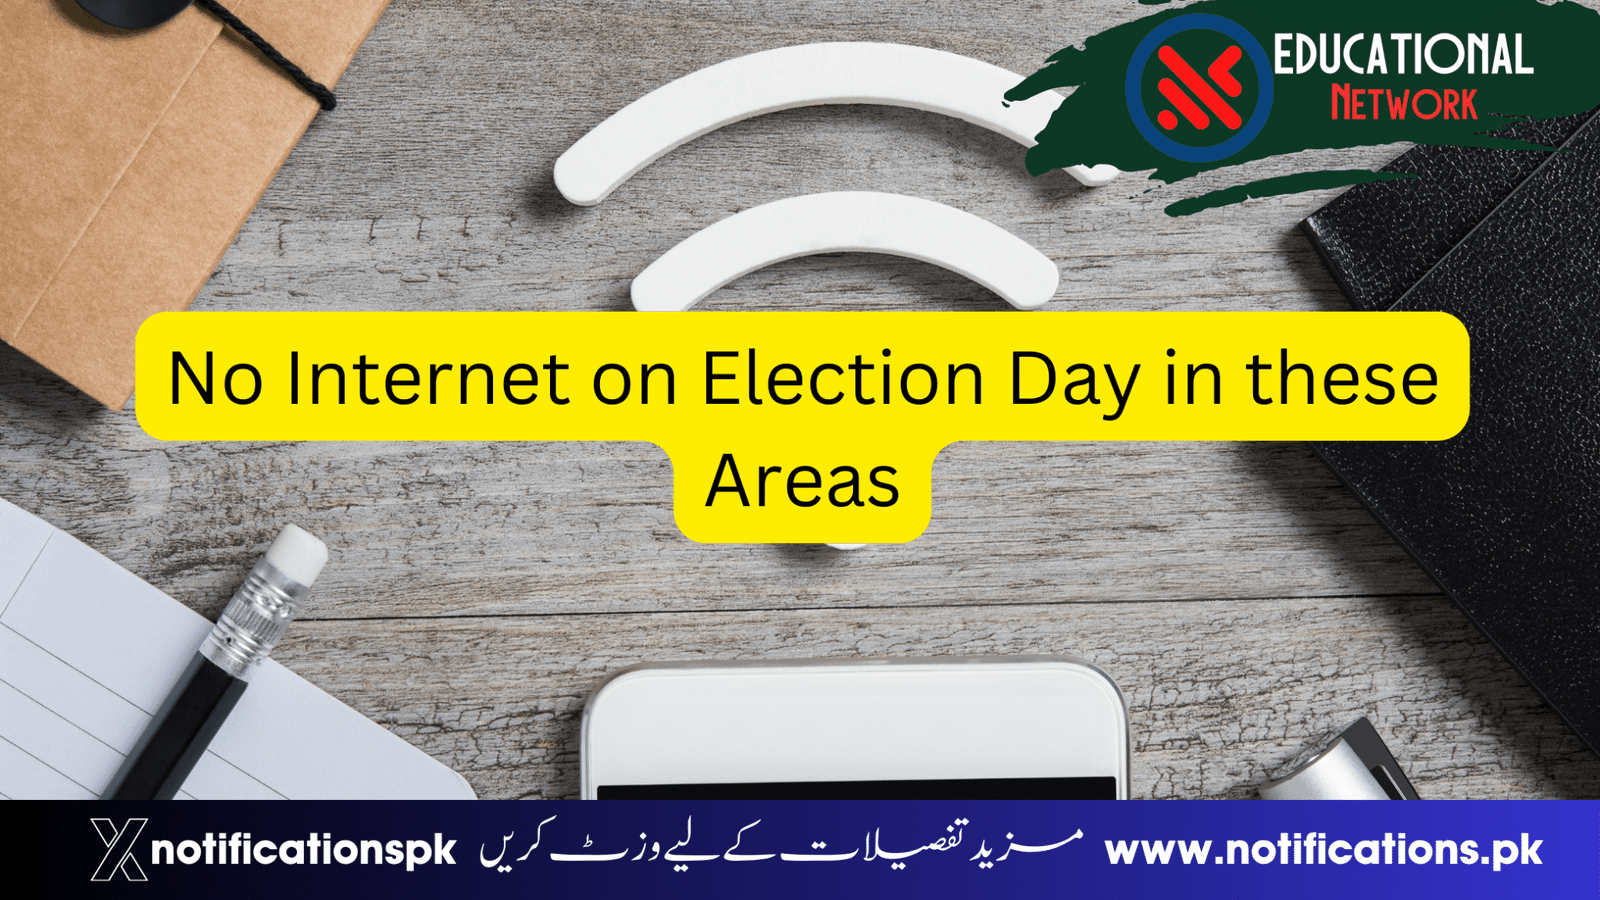 No Internet on Election Day in these Areas